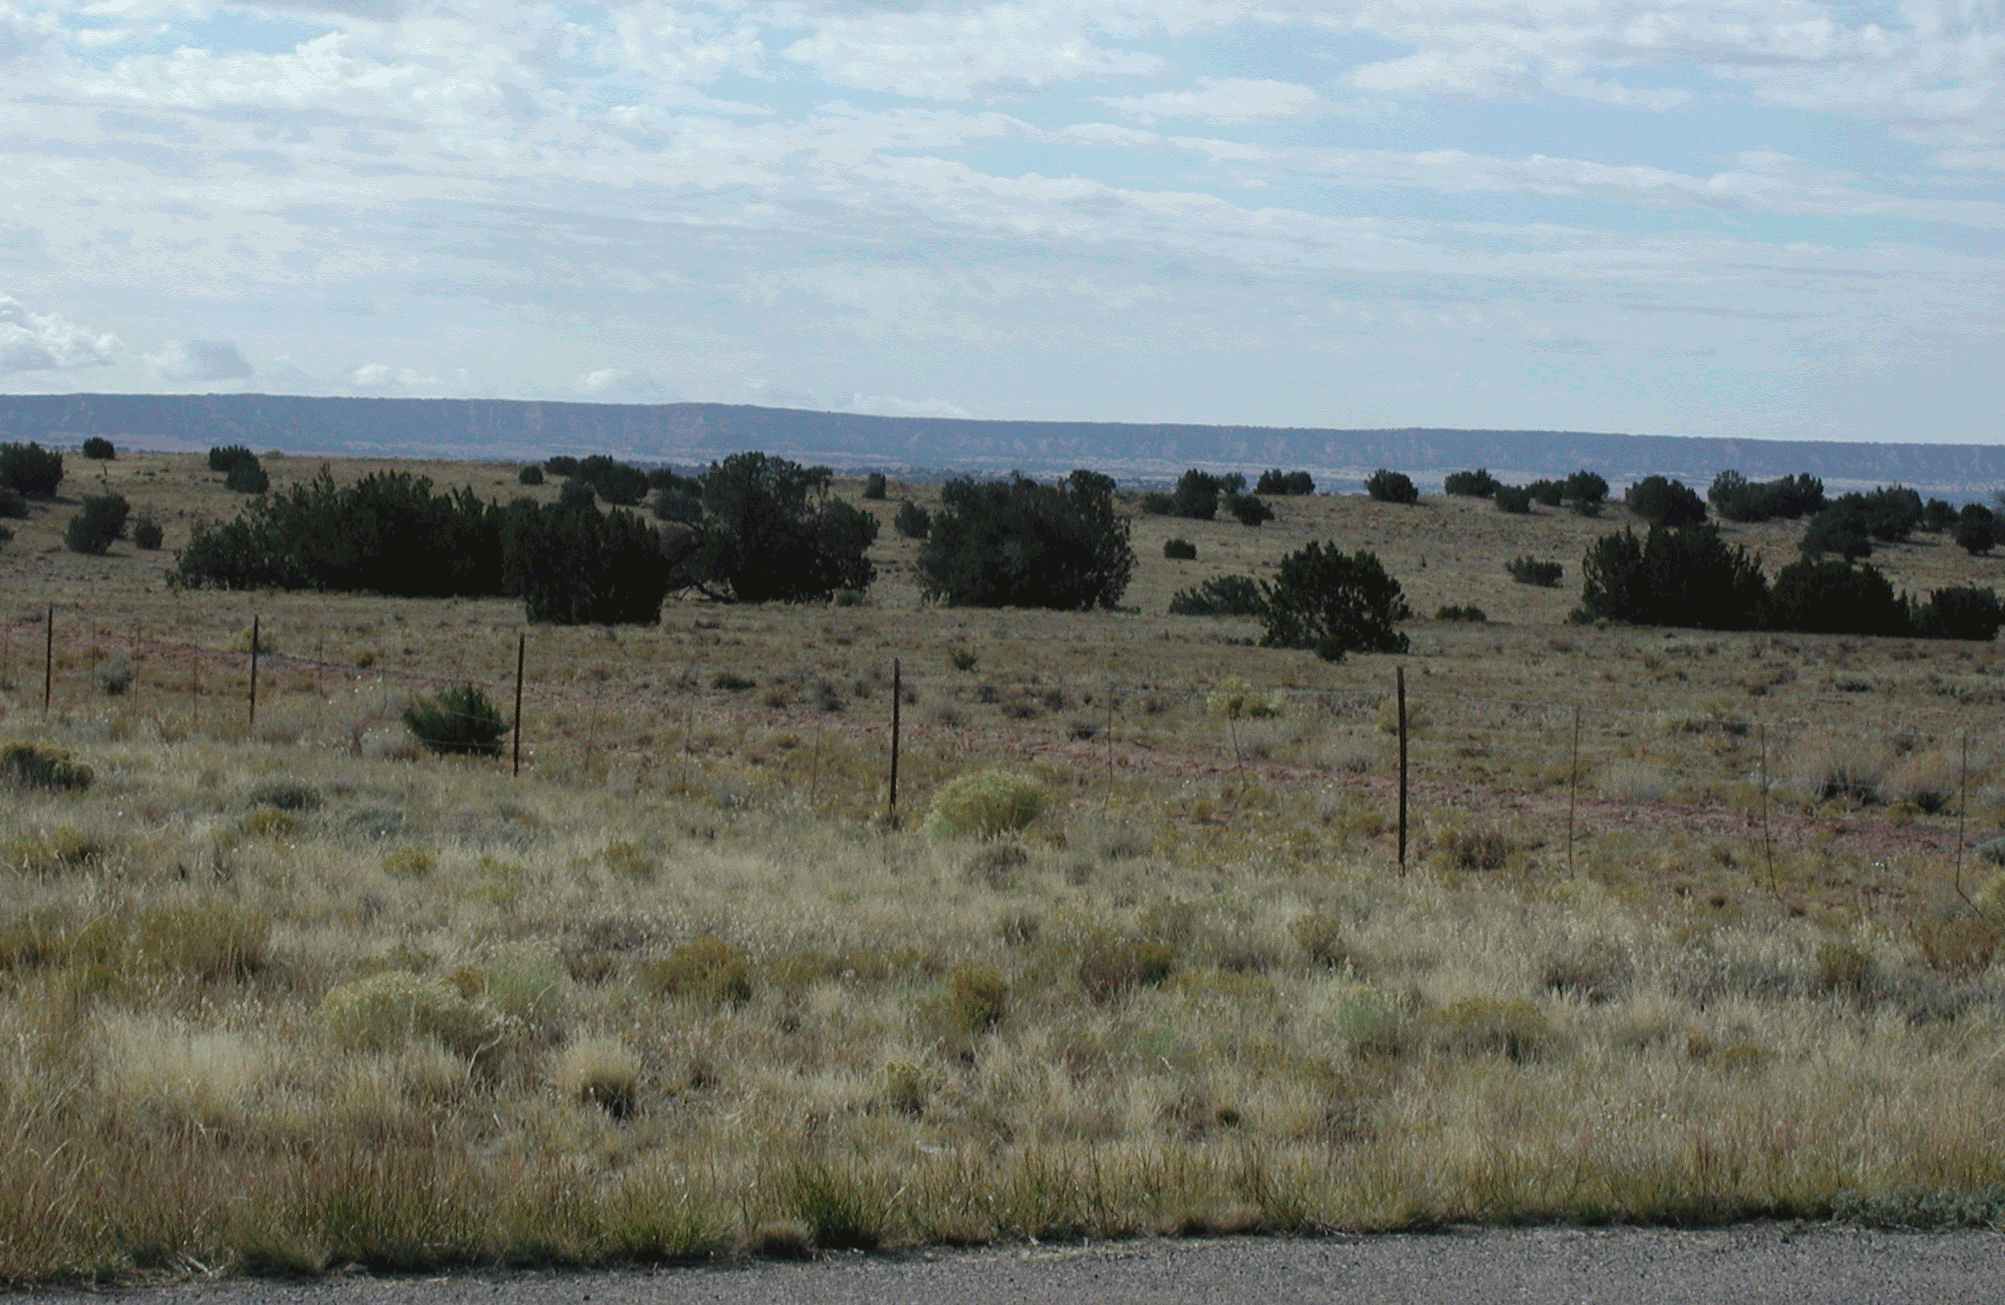 Ranchland in area - NOT ACTUAL PROPERTY -Click for a large photo